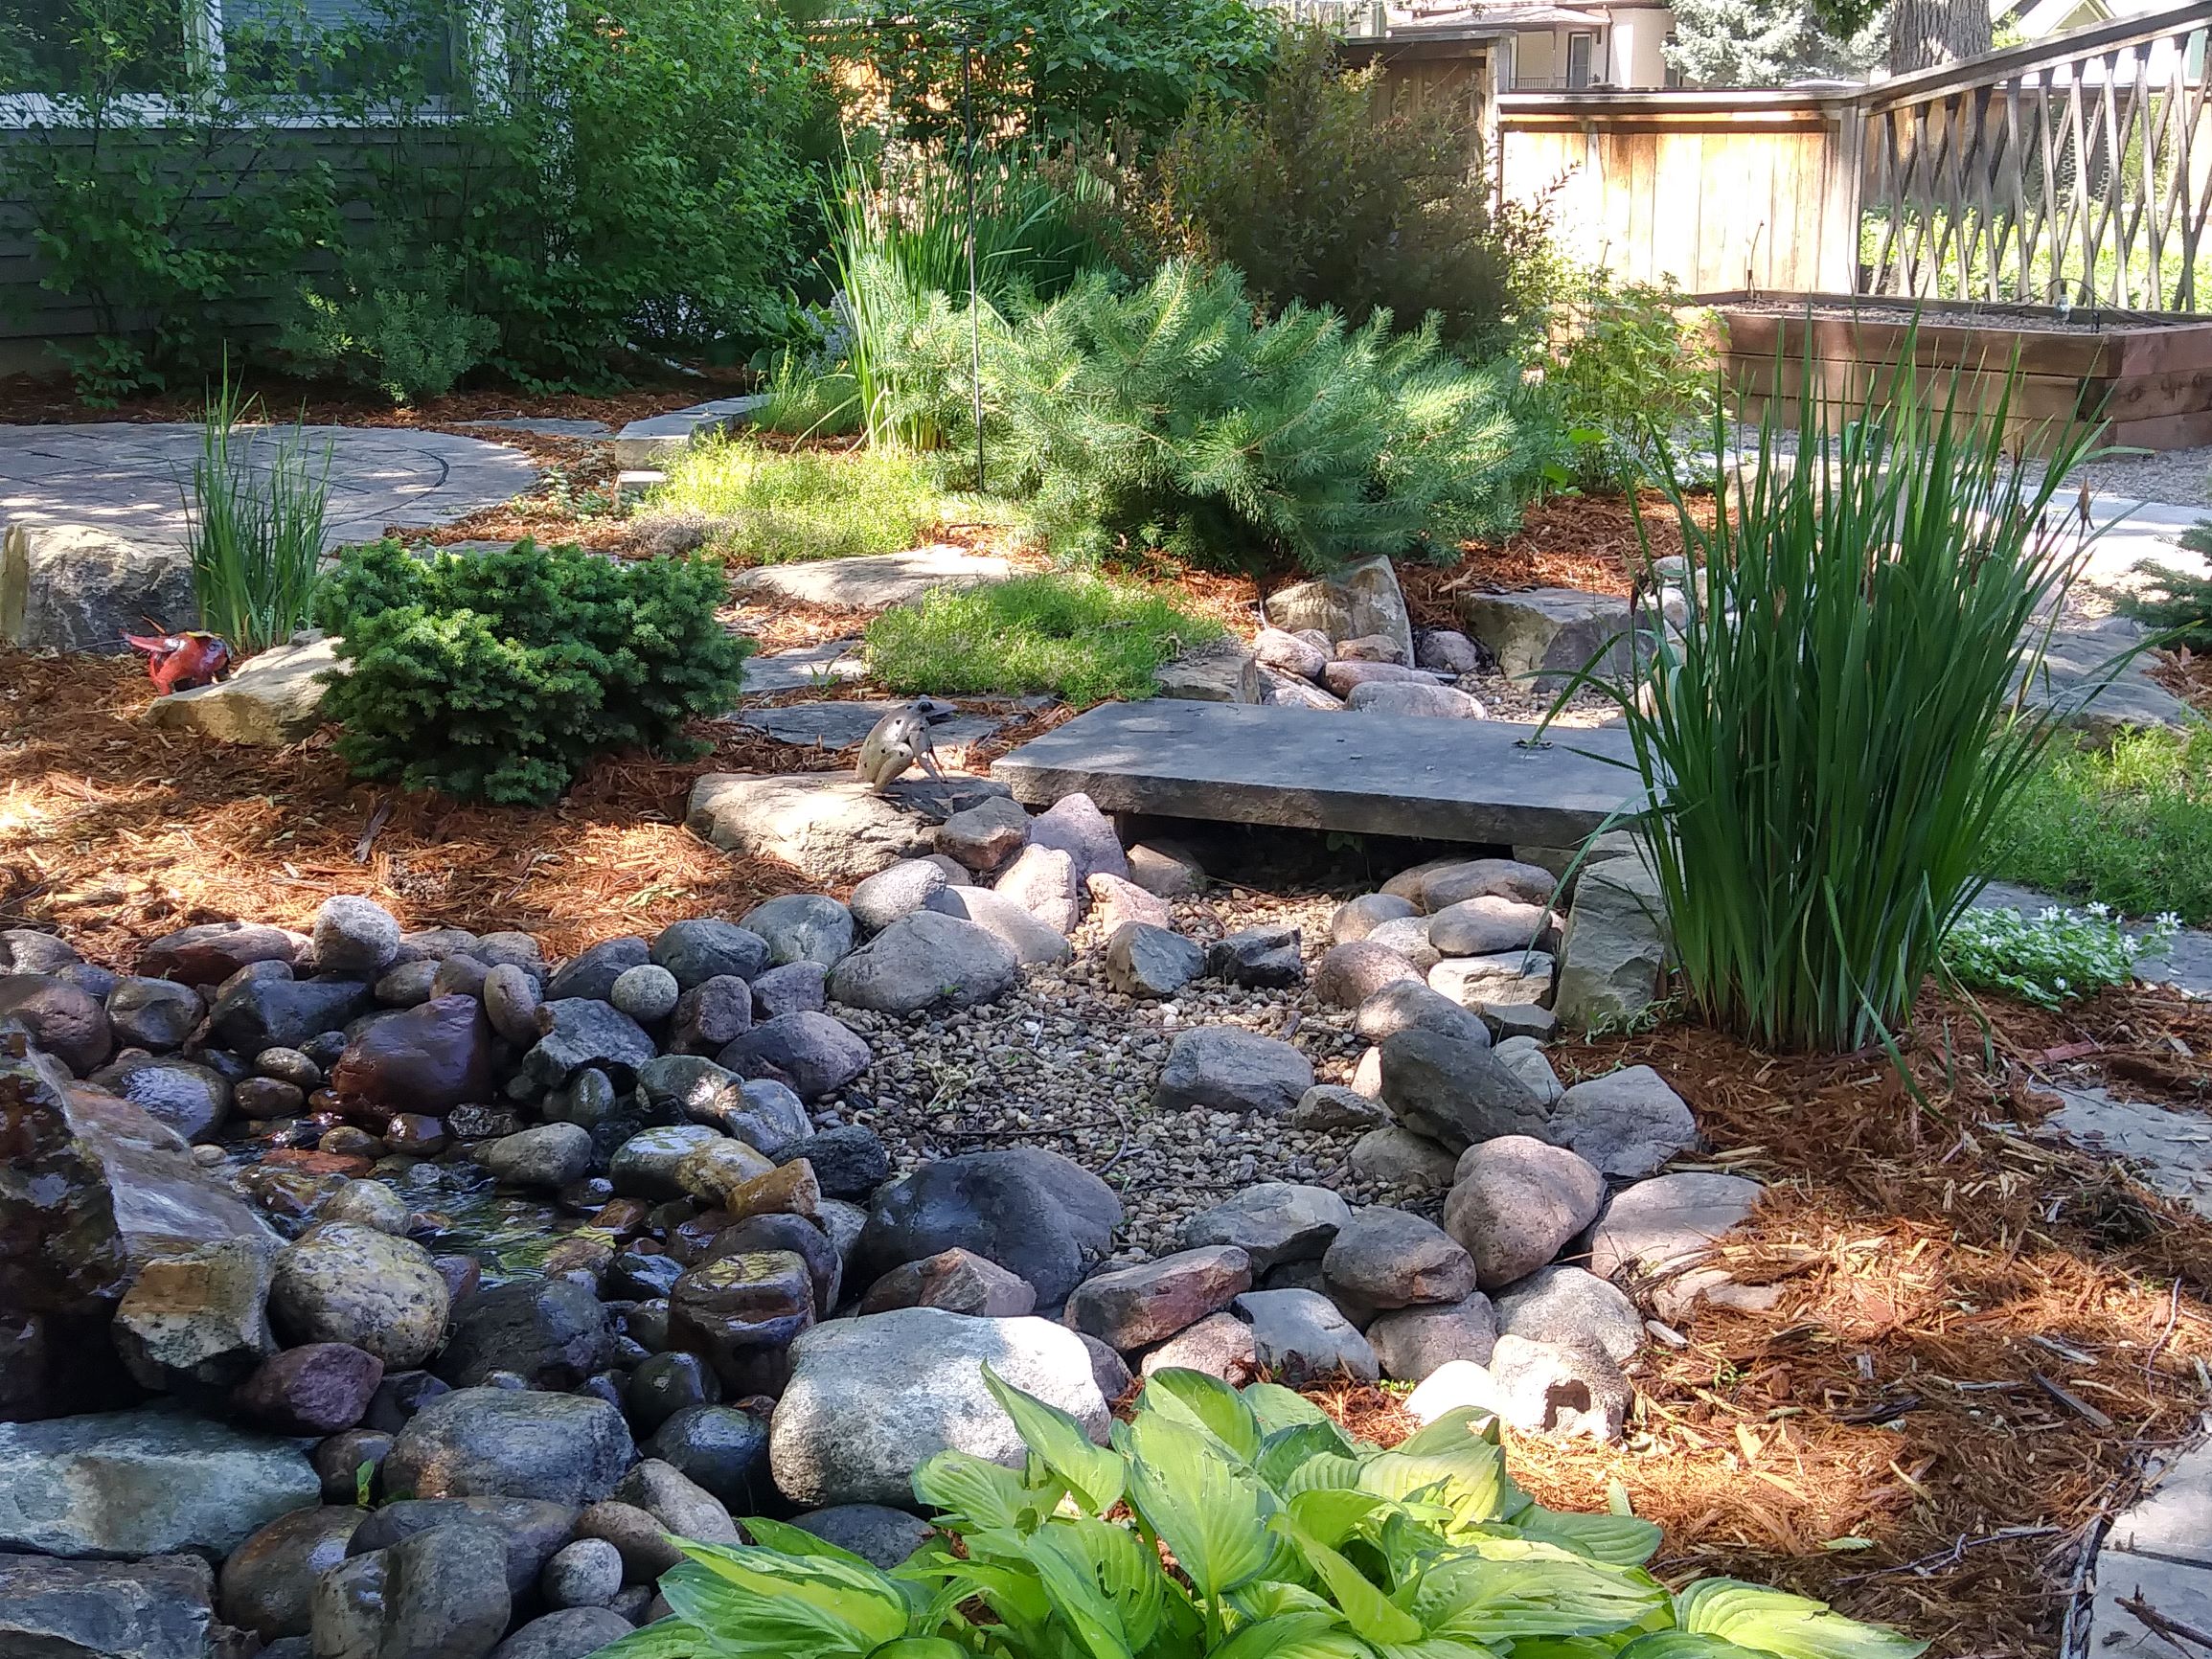 Small stone bridge over backyard stream. Surrounded by mulch and low water plants and bushes.